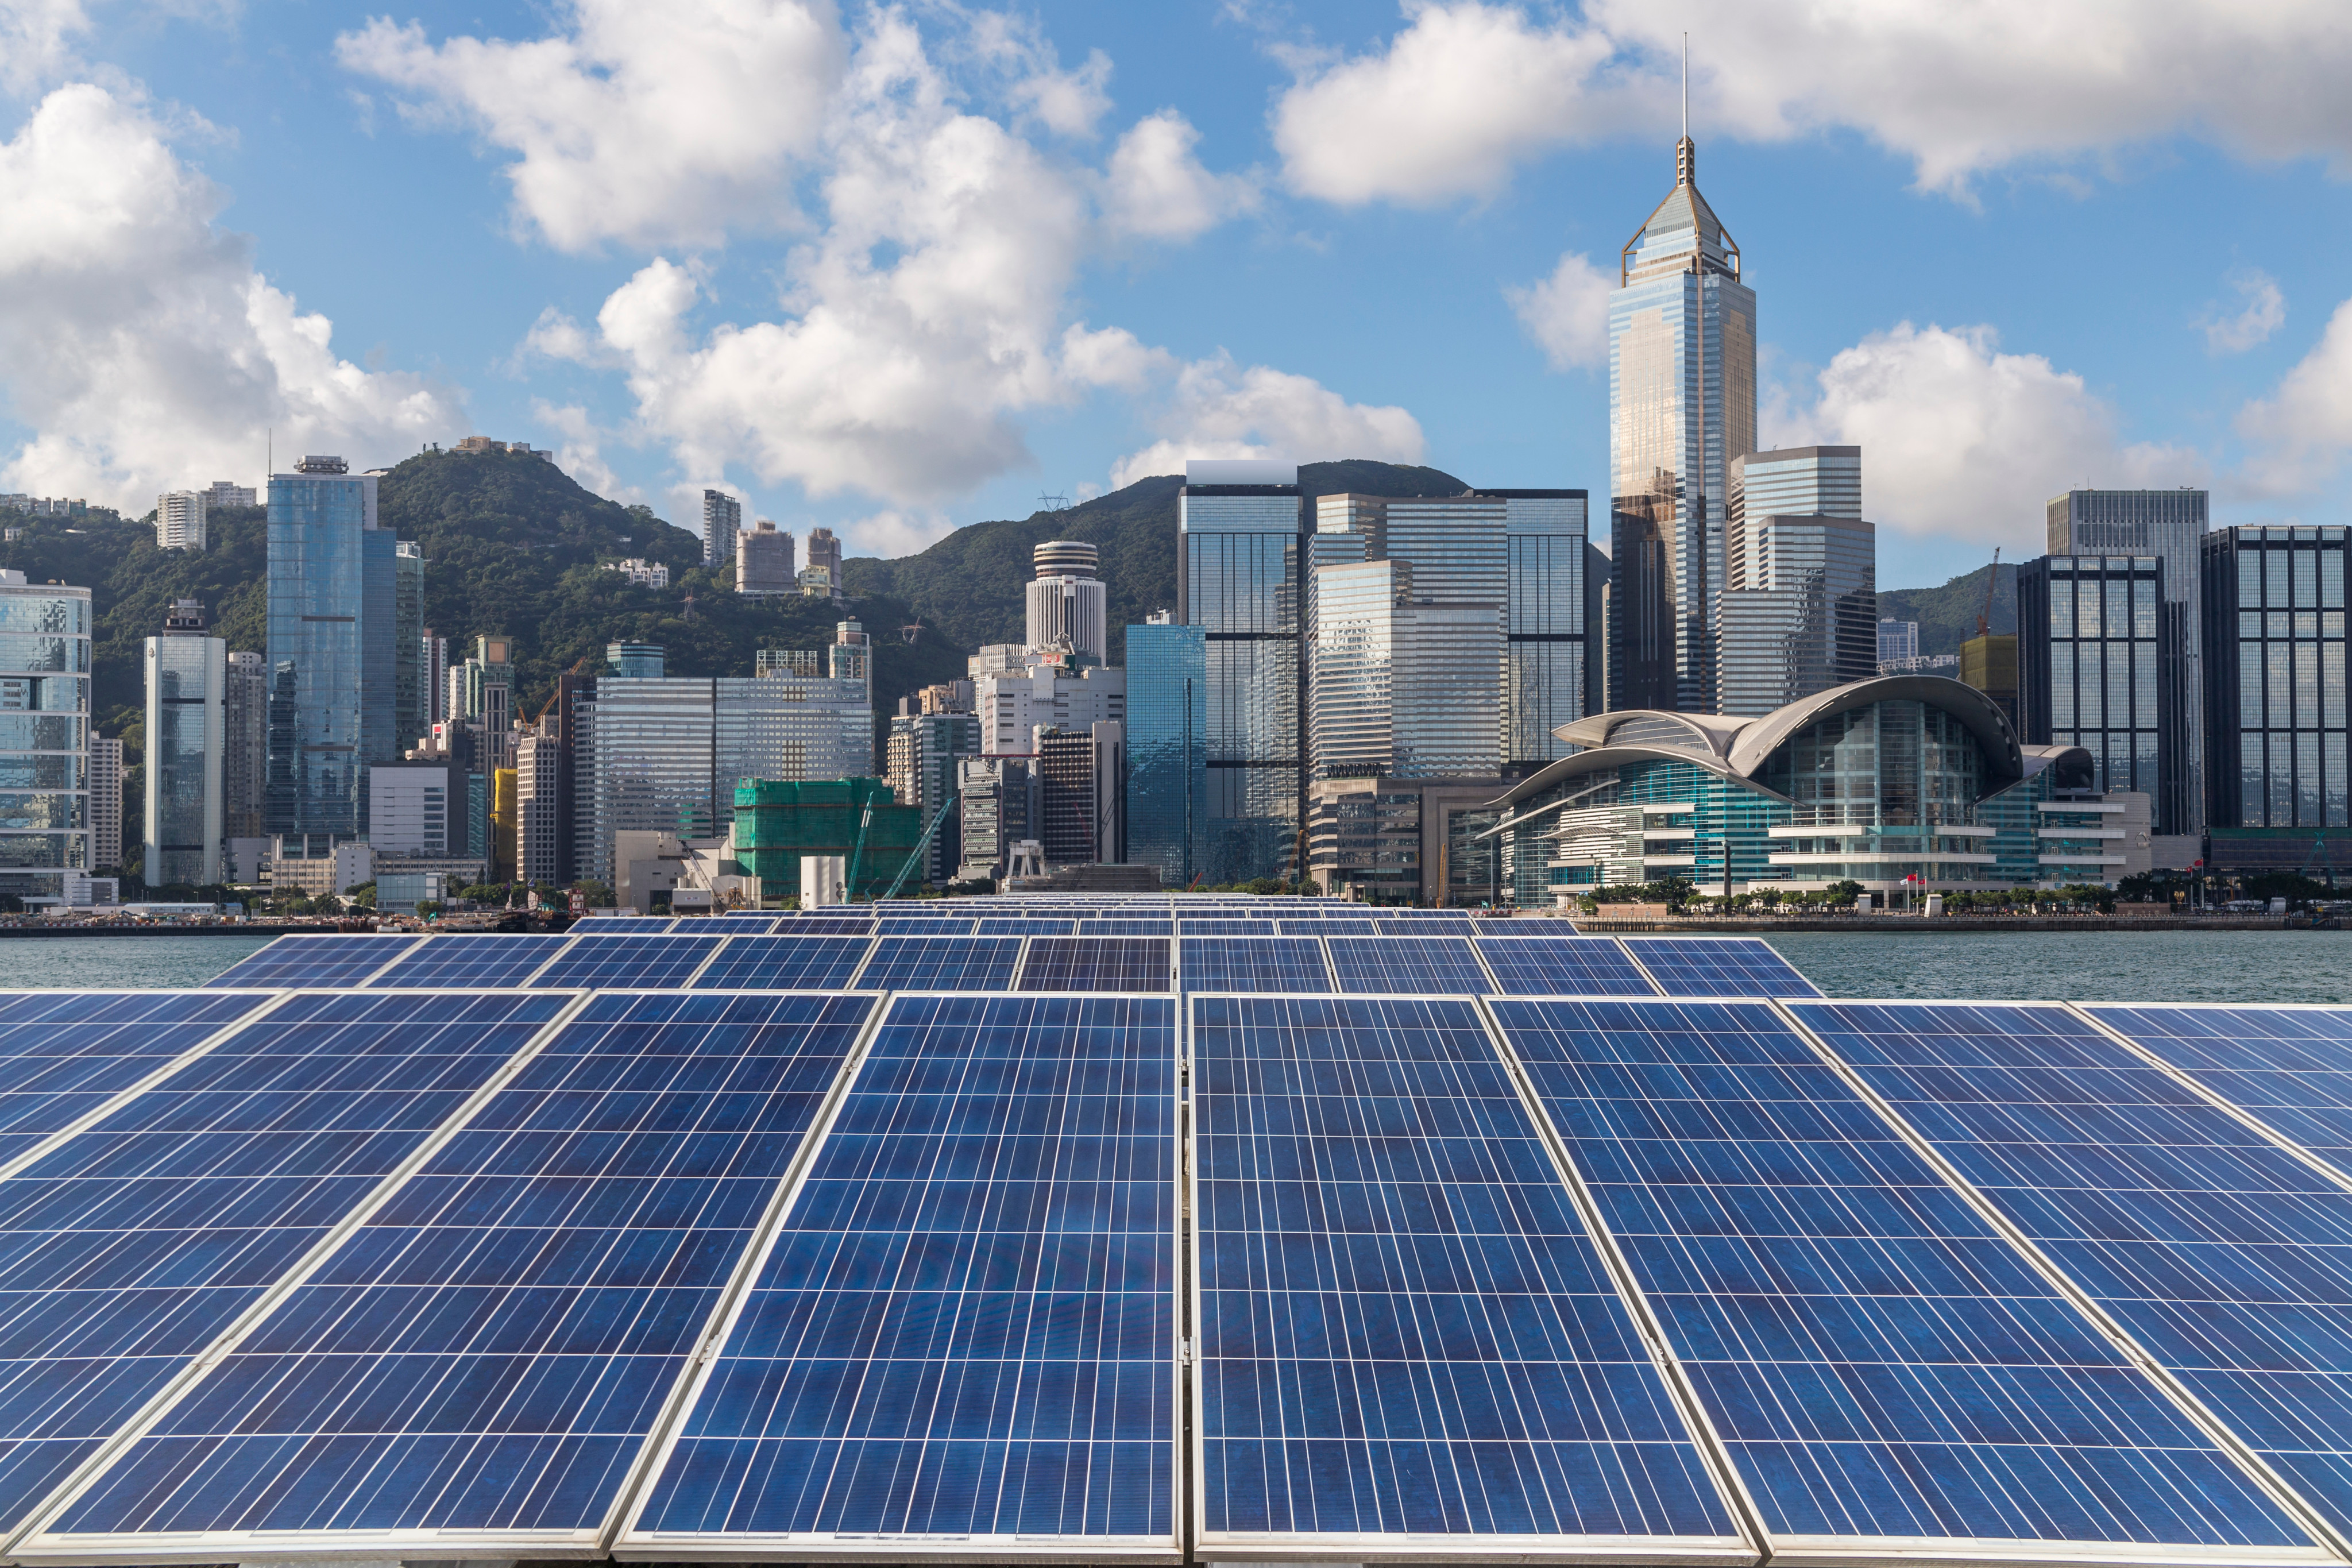 An artist’s conception of solar panels in Hong Kong’s harbour. Photo illustration: Shutterstock